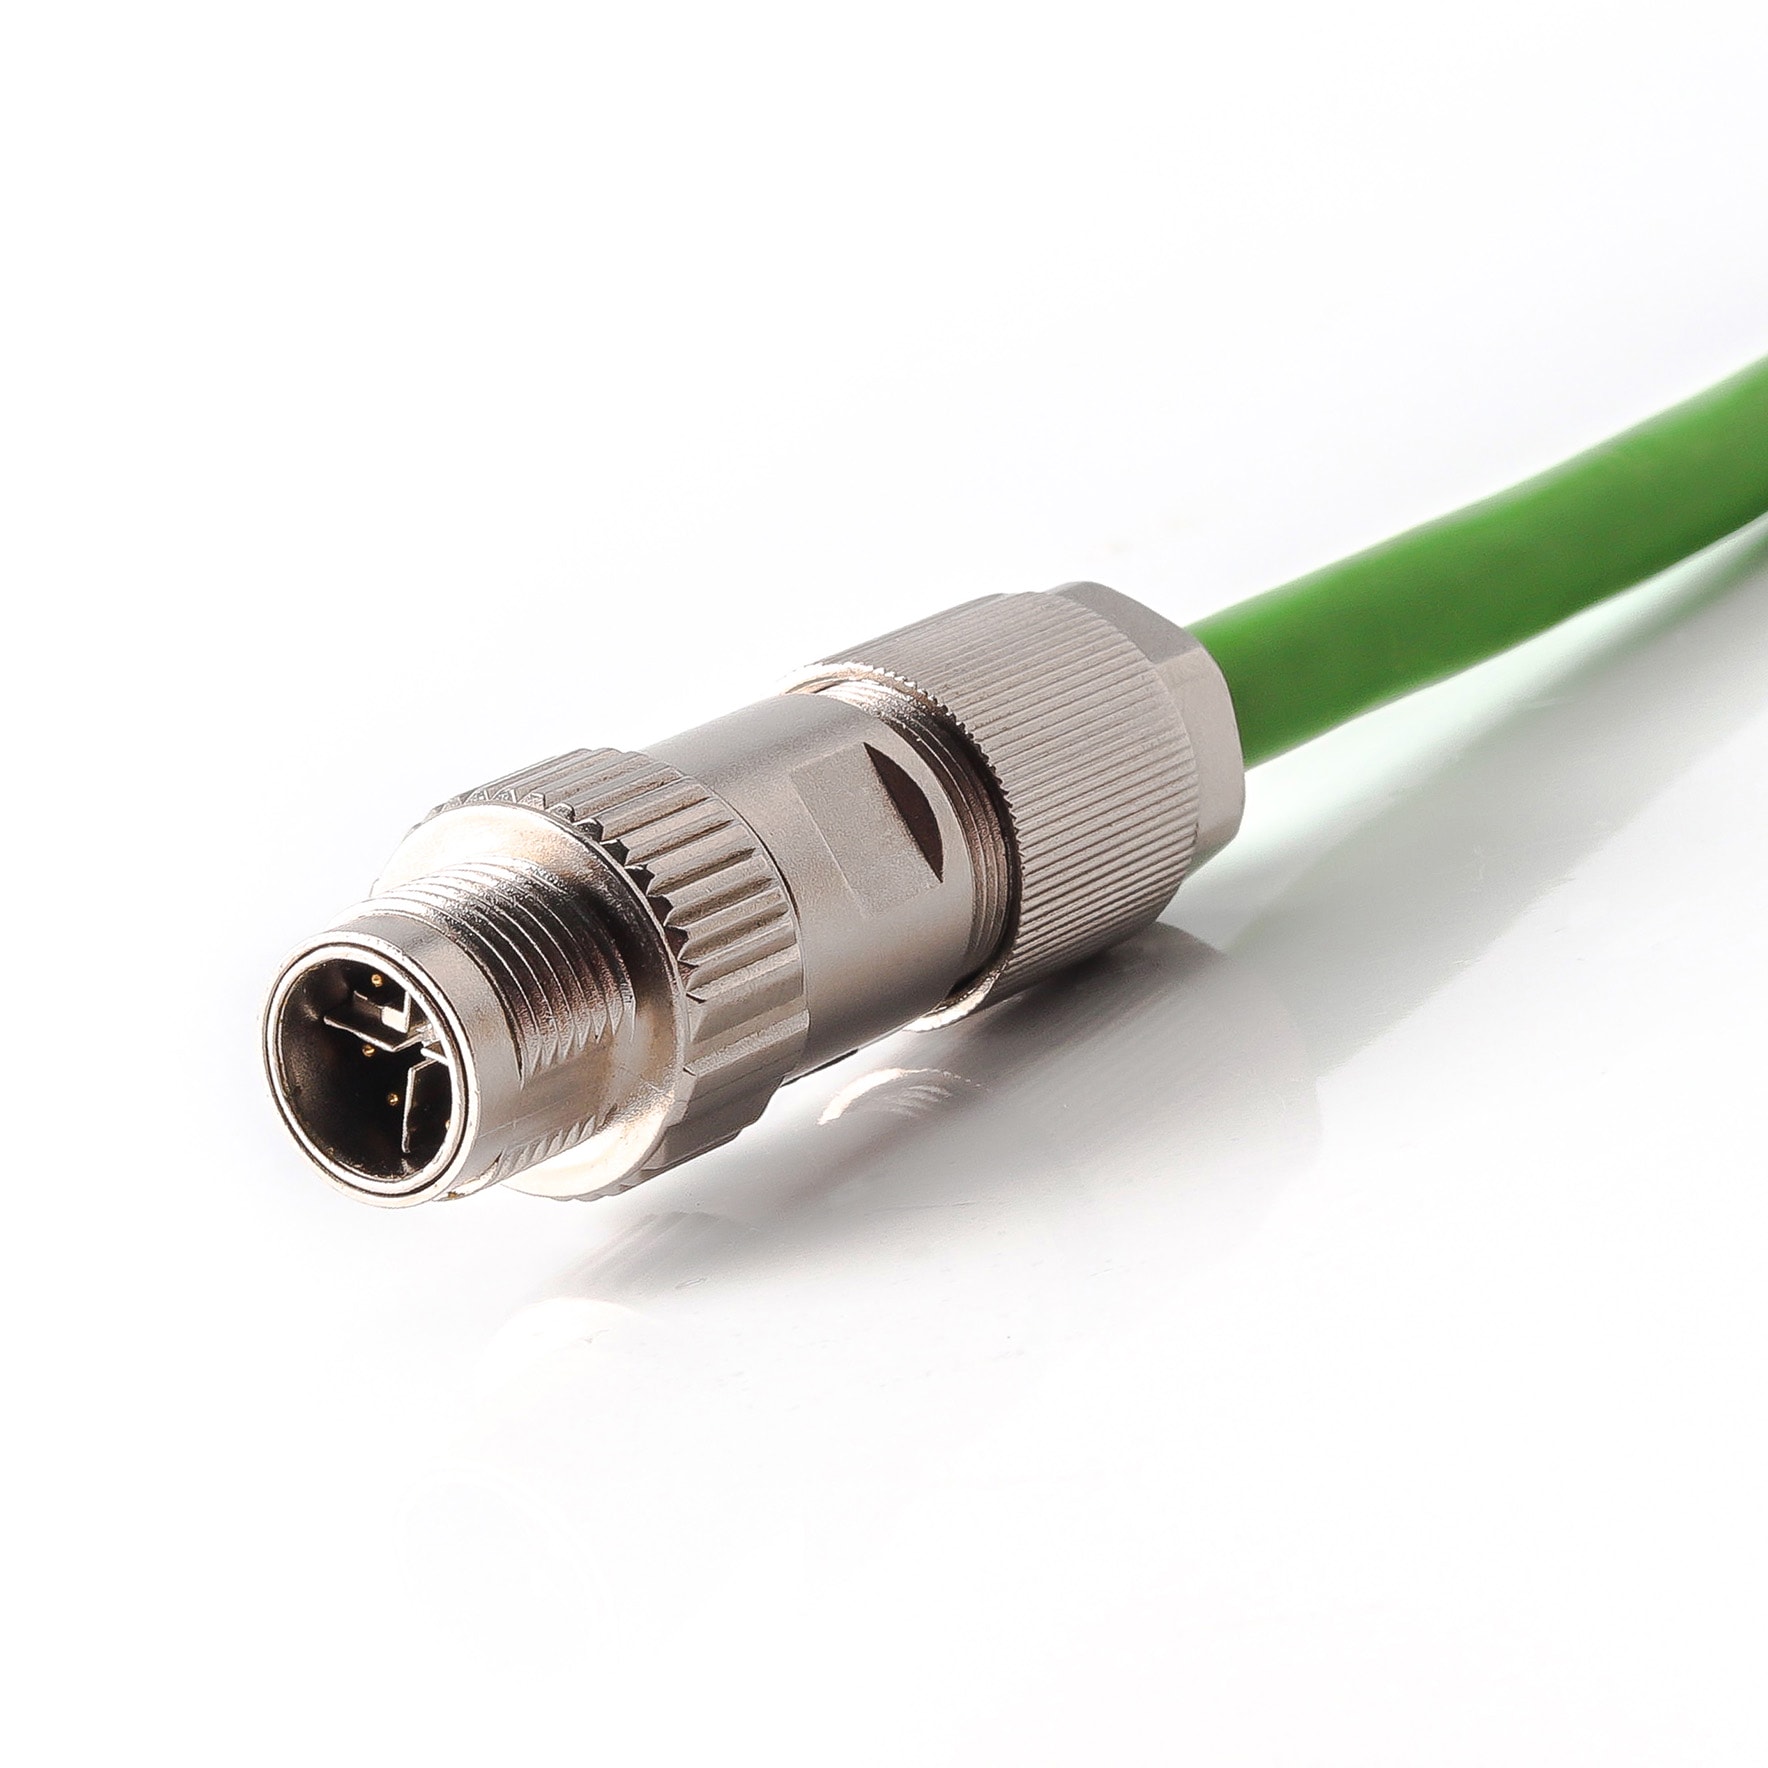 M12 X Code Male ProfiNET/EtherNET Cable M12 Connector X Coded